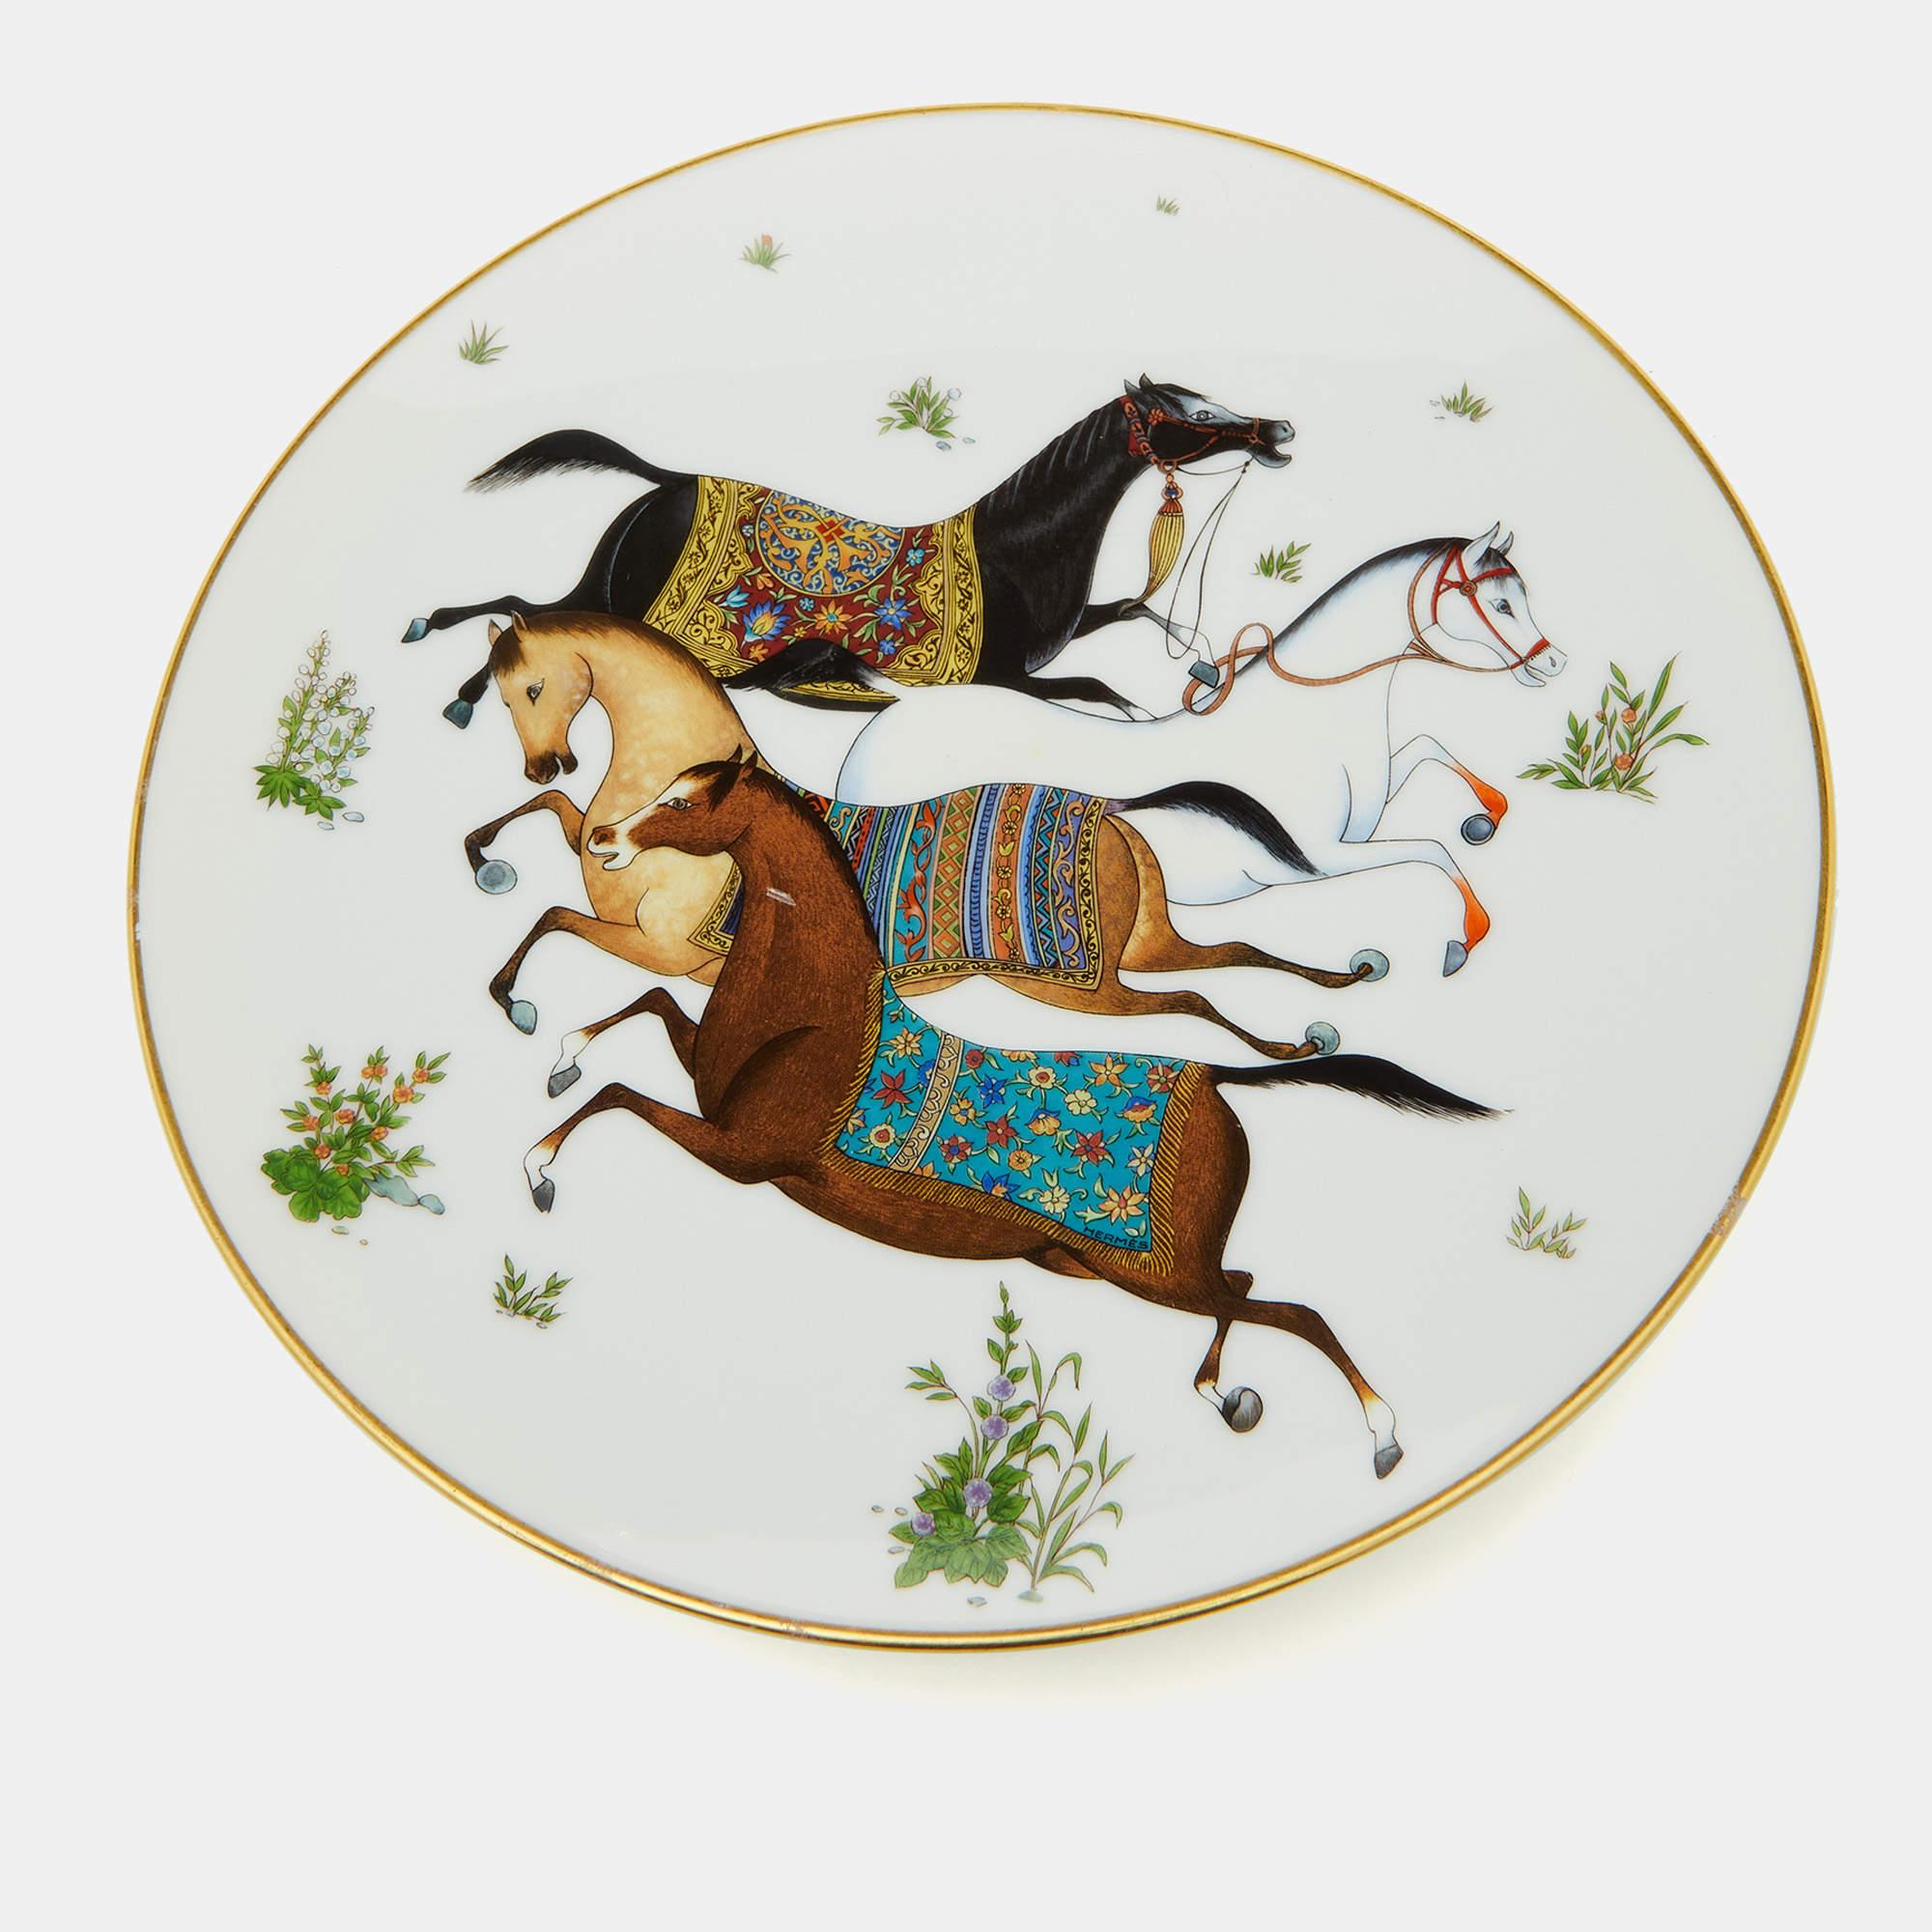 The Hermes plate set exudes timeless elegance. Each plate features an exquisite Cheval d'Orient motif, delicately printed on high-quality white porcelain. Perfectly sized for desserts, these plates blend sophistication with artistic craftsmanship,